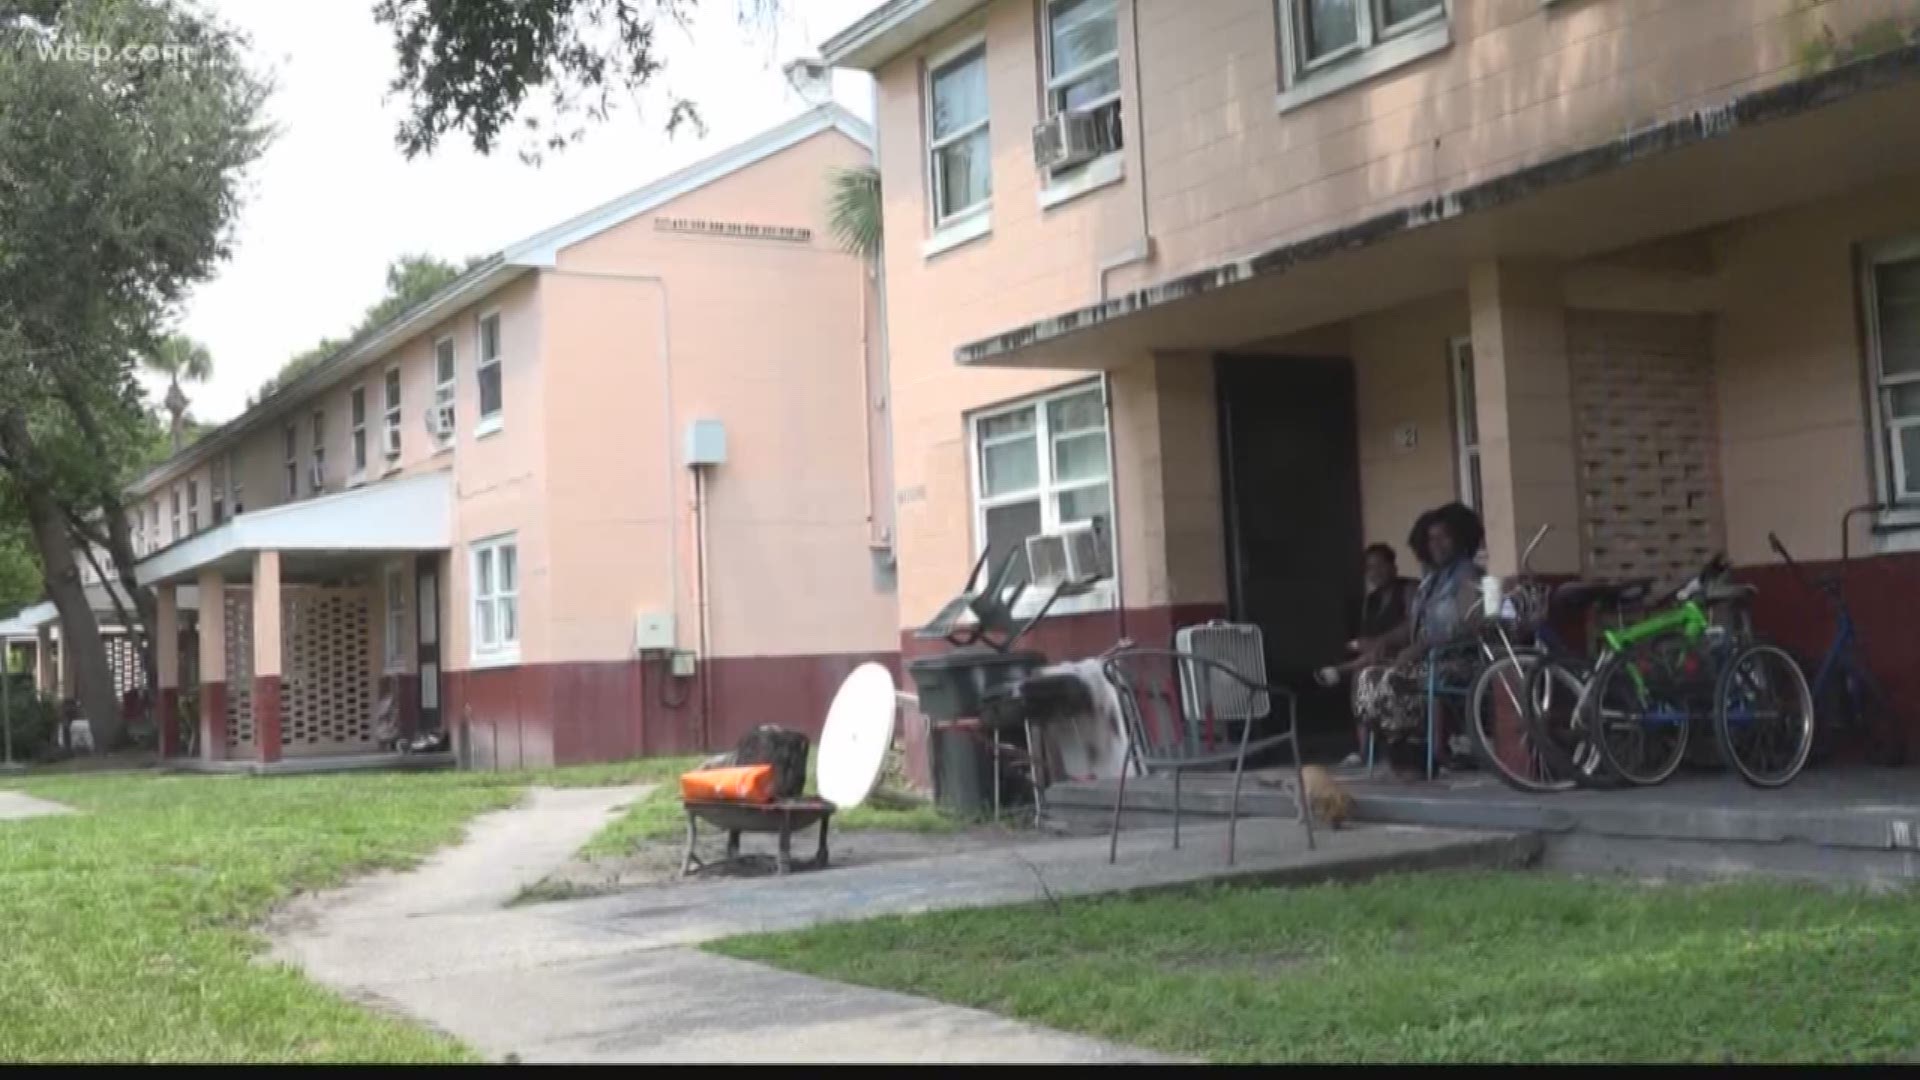 Tampa Housing Authority are not totally supportive of the bill that would take a deeper look at Zion Cemetery. https://on.wtsp.com/2k9dgXm